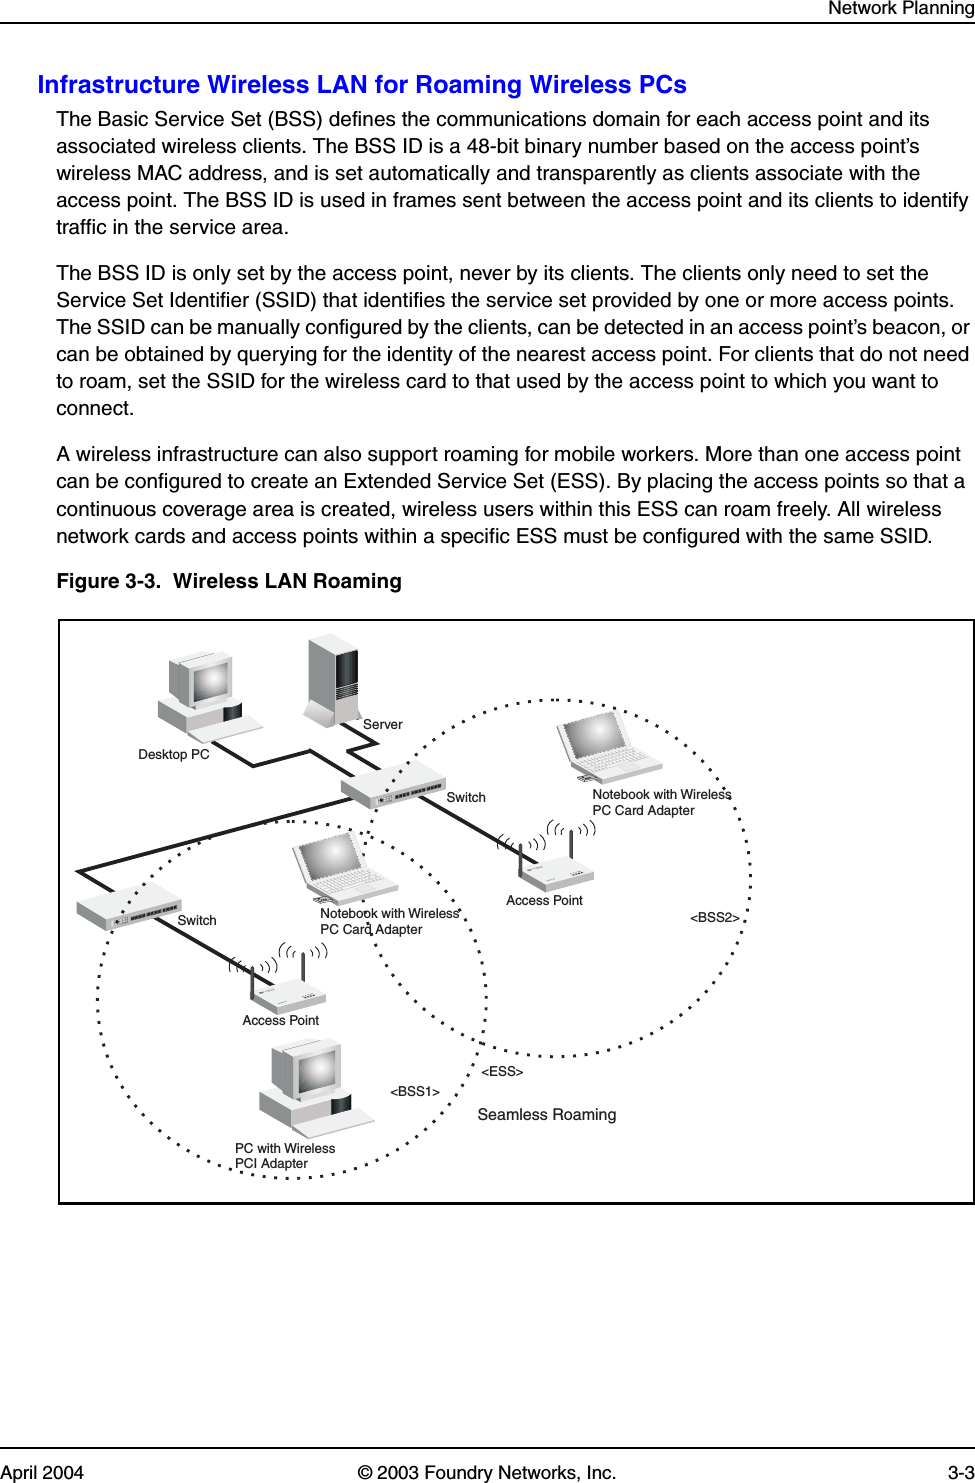 Network PlanningApril 2004 © 2003 Foundry Networks, Inc. 3-3Infrastructure Wireless LAN for Roaming Wireless PCsThe Basic Service Set (BSS) defines the communications domain for each access point and its associated wireless clients. The BSS ID is a 48-bit binary number based on the access point’s wireless MAC address, and is set automatically and transparently as clients associate with the access point. The BSS ID is used in frames sent between the access point and its clients to identify traffic in the service area. The BSS ID is only set by the access point, never by its clients. The clients only need to set the Service Set Identifier (SSID) that identifies the service set provided by one or more access points. The SSID can be manually configured by the clients, can be detected in an access point’s beacon, or can be obtained by querying for the identity of the nearest access point. For clients that do not need to roam, set the SSID for the wireless card to that used by the access point to which you want to connect.A wireless infrastructure can also support roaming for mobile workers. More than one access point can be configured to create an Extended Service Set (ESS). By placing the access points so that a continuous coverage area is created, wireless users within this ESS can roam freely. All wireless network cards and access points within a specific ESS must be configured with the same SSID.Figure 3-3.  Wireless LAN Roaming&lt;BSS2&gt;Seamless Roaming&lt;ESS&gt;&lt;BSS1&gt;ServerSwitchDesktop PCAccess PointPC with WirelessPCI AdapterNotebook with WirelessPC Card AdapterNotebook with WirelessPC Card AdapterAccess PointSwitch